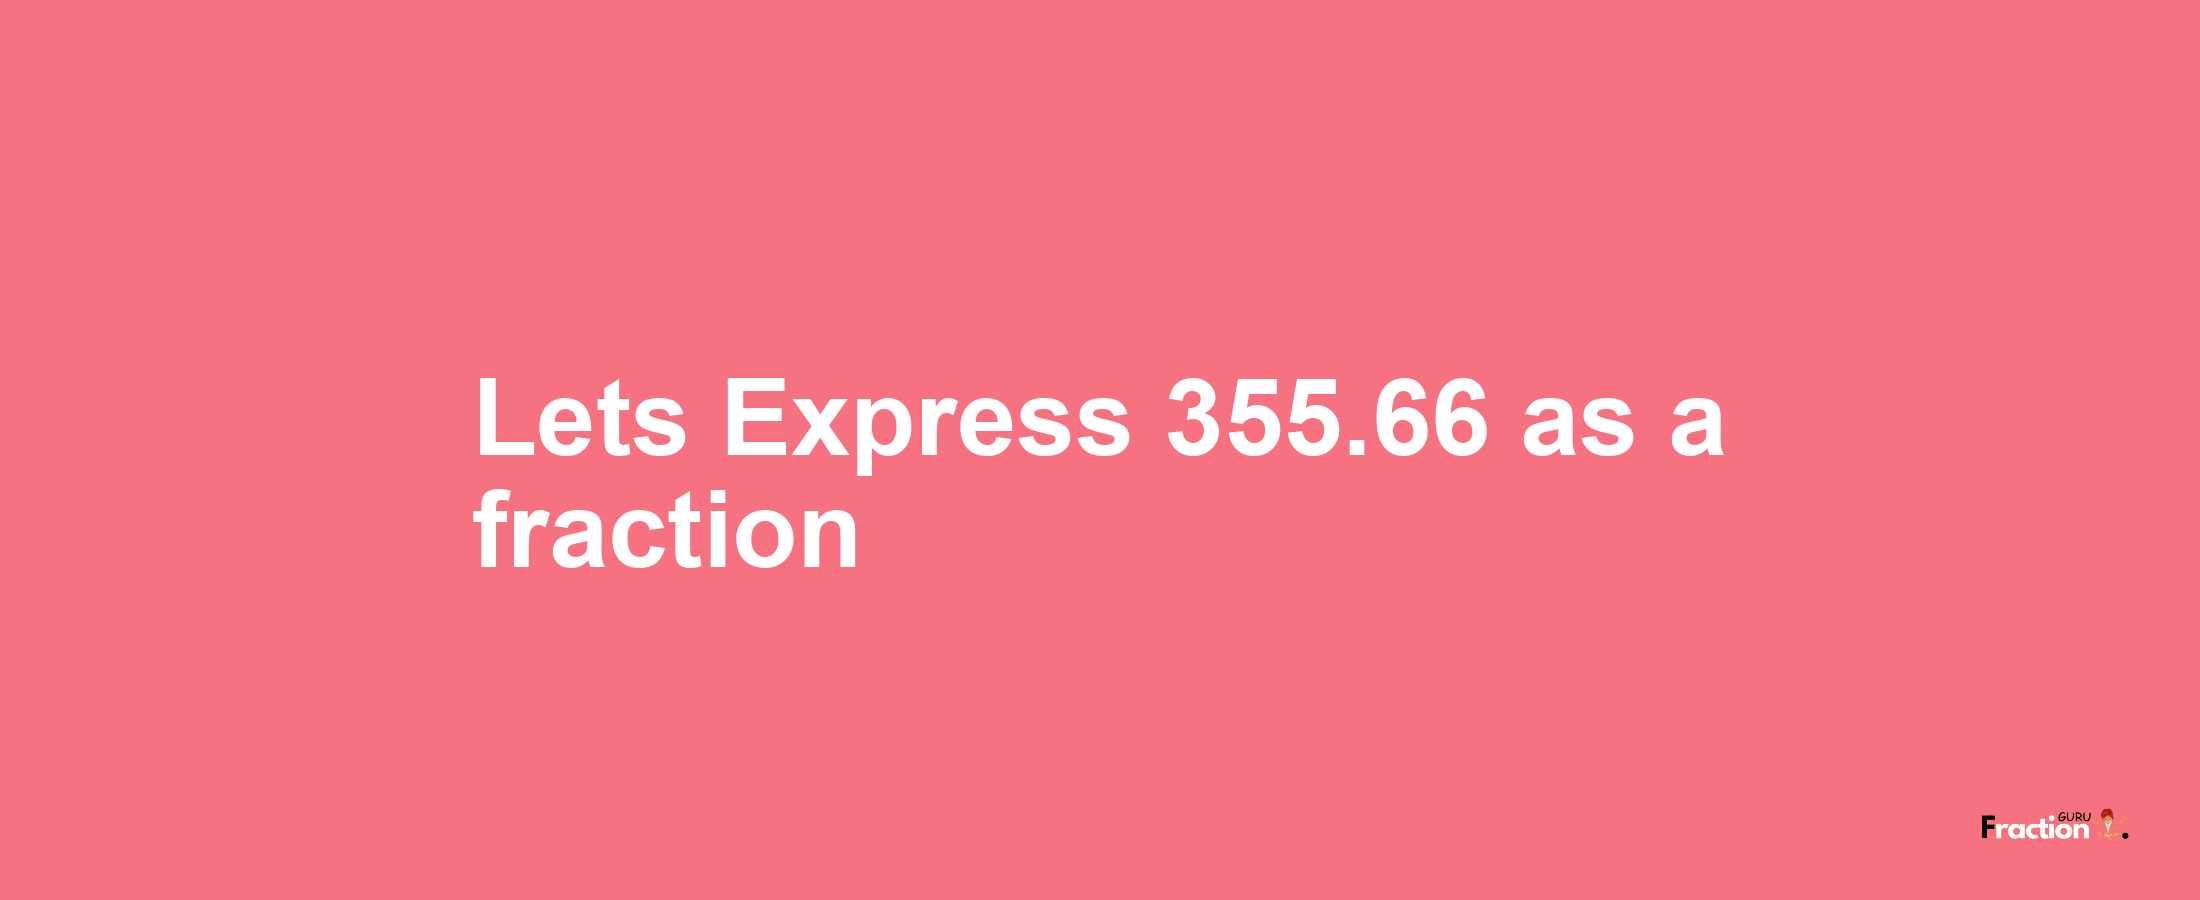 Lets Express 355.66 as afraction